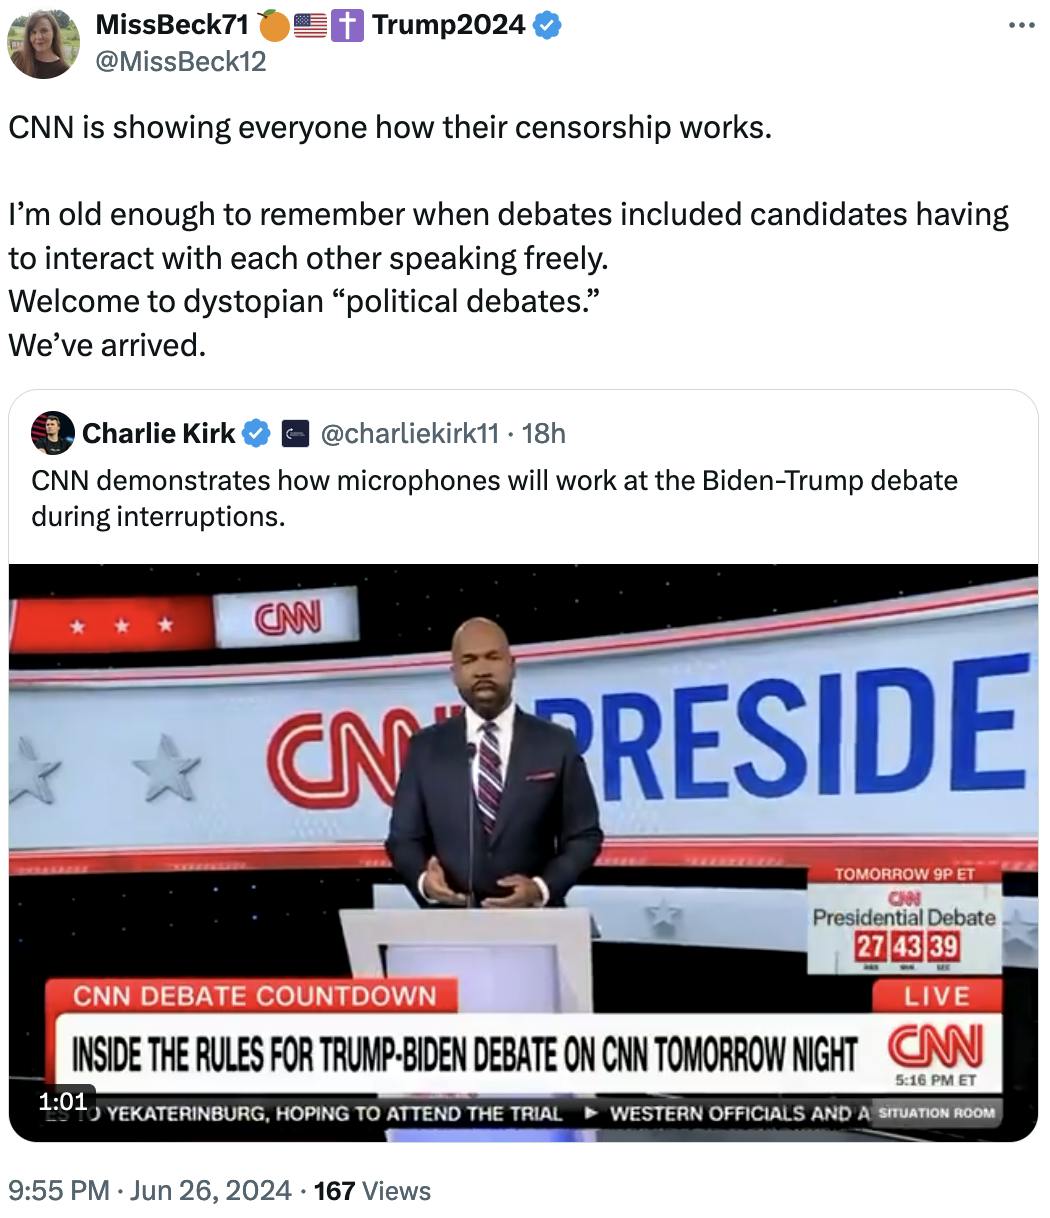 Twitter Screenshot MissBeck71 🍊🇺🇸✝️ Trump2024 @MissBeck12: CNN is showing everyone how their censorship works. I’m old enough to remember when debates included candidates having to interact with each other speaking freely. Welcome to dystopian “political debates.” We’ve arrived.